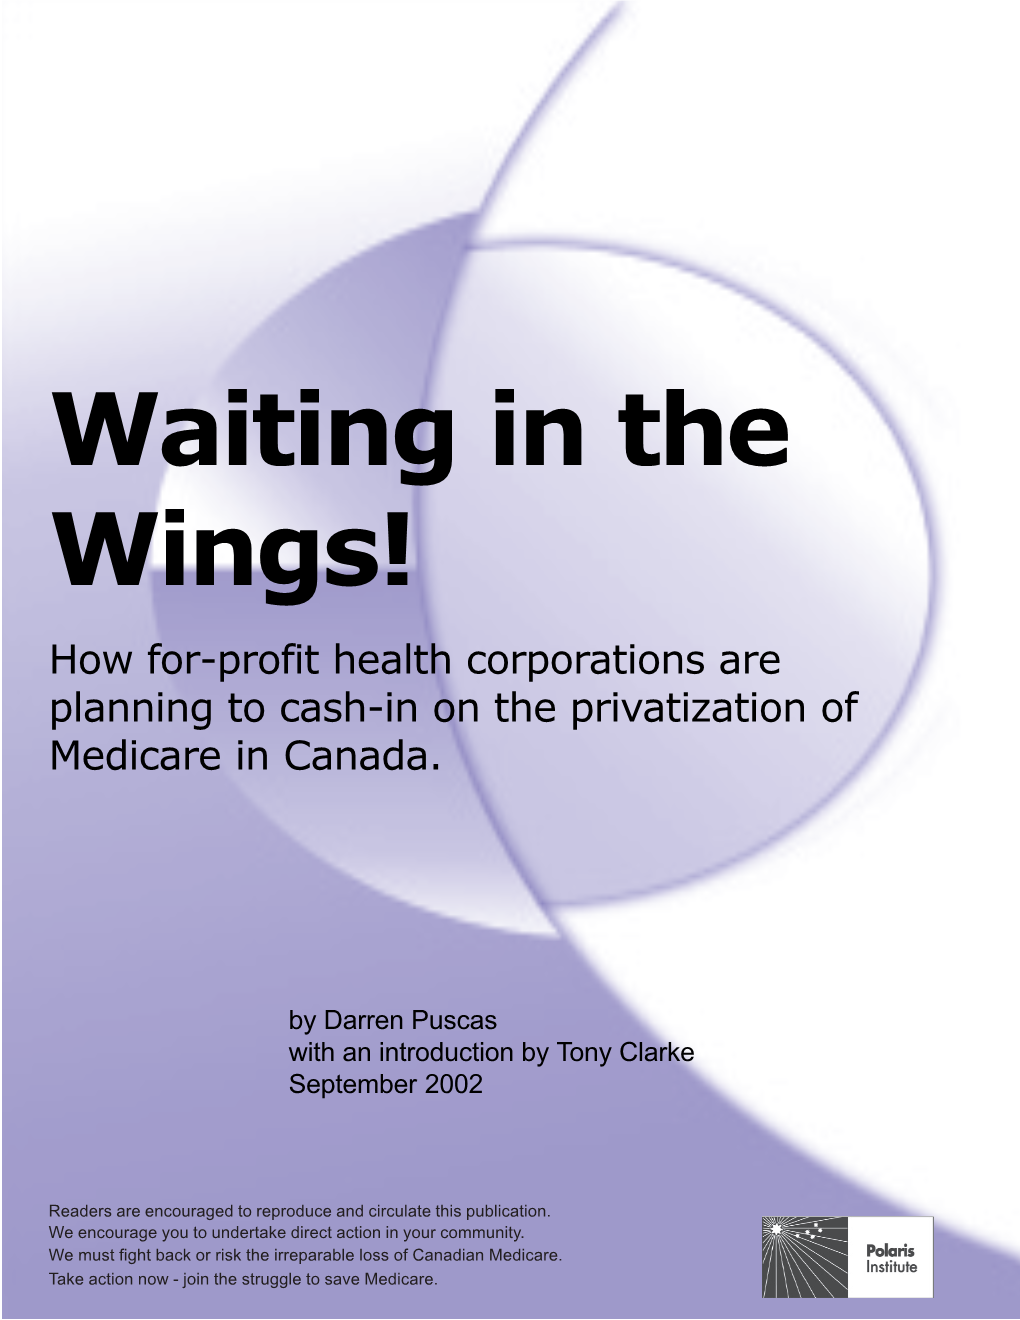 Waiting in the Wings! How For-Profit Health Corporations Are Planning to Cash-In on the Privatization of Medicare in Canada